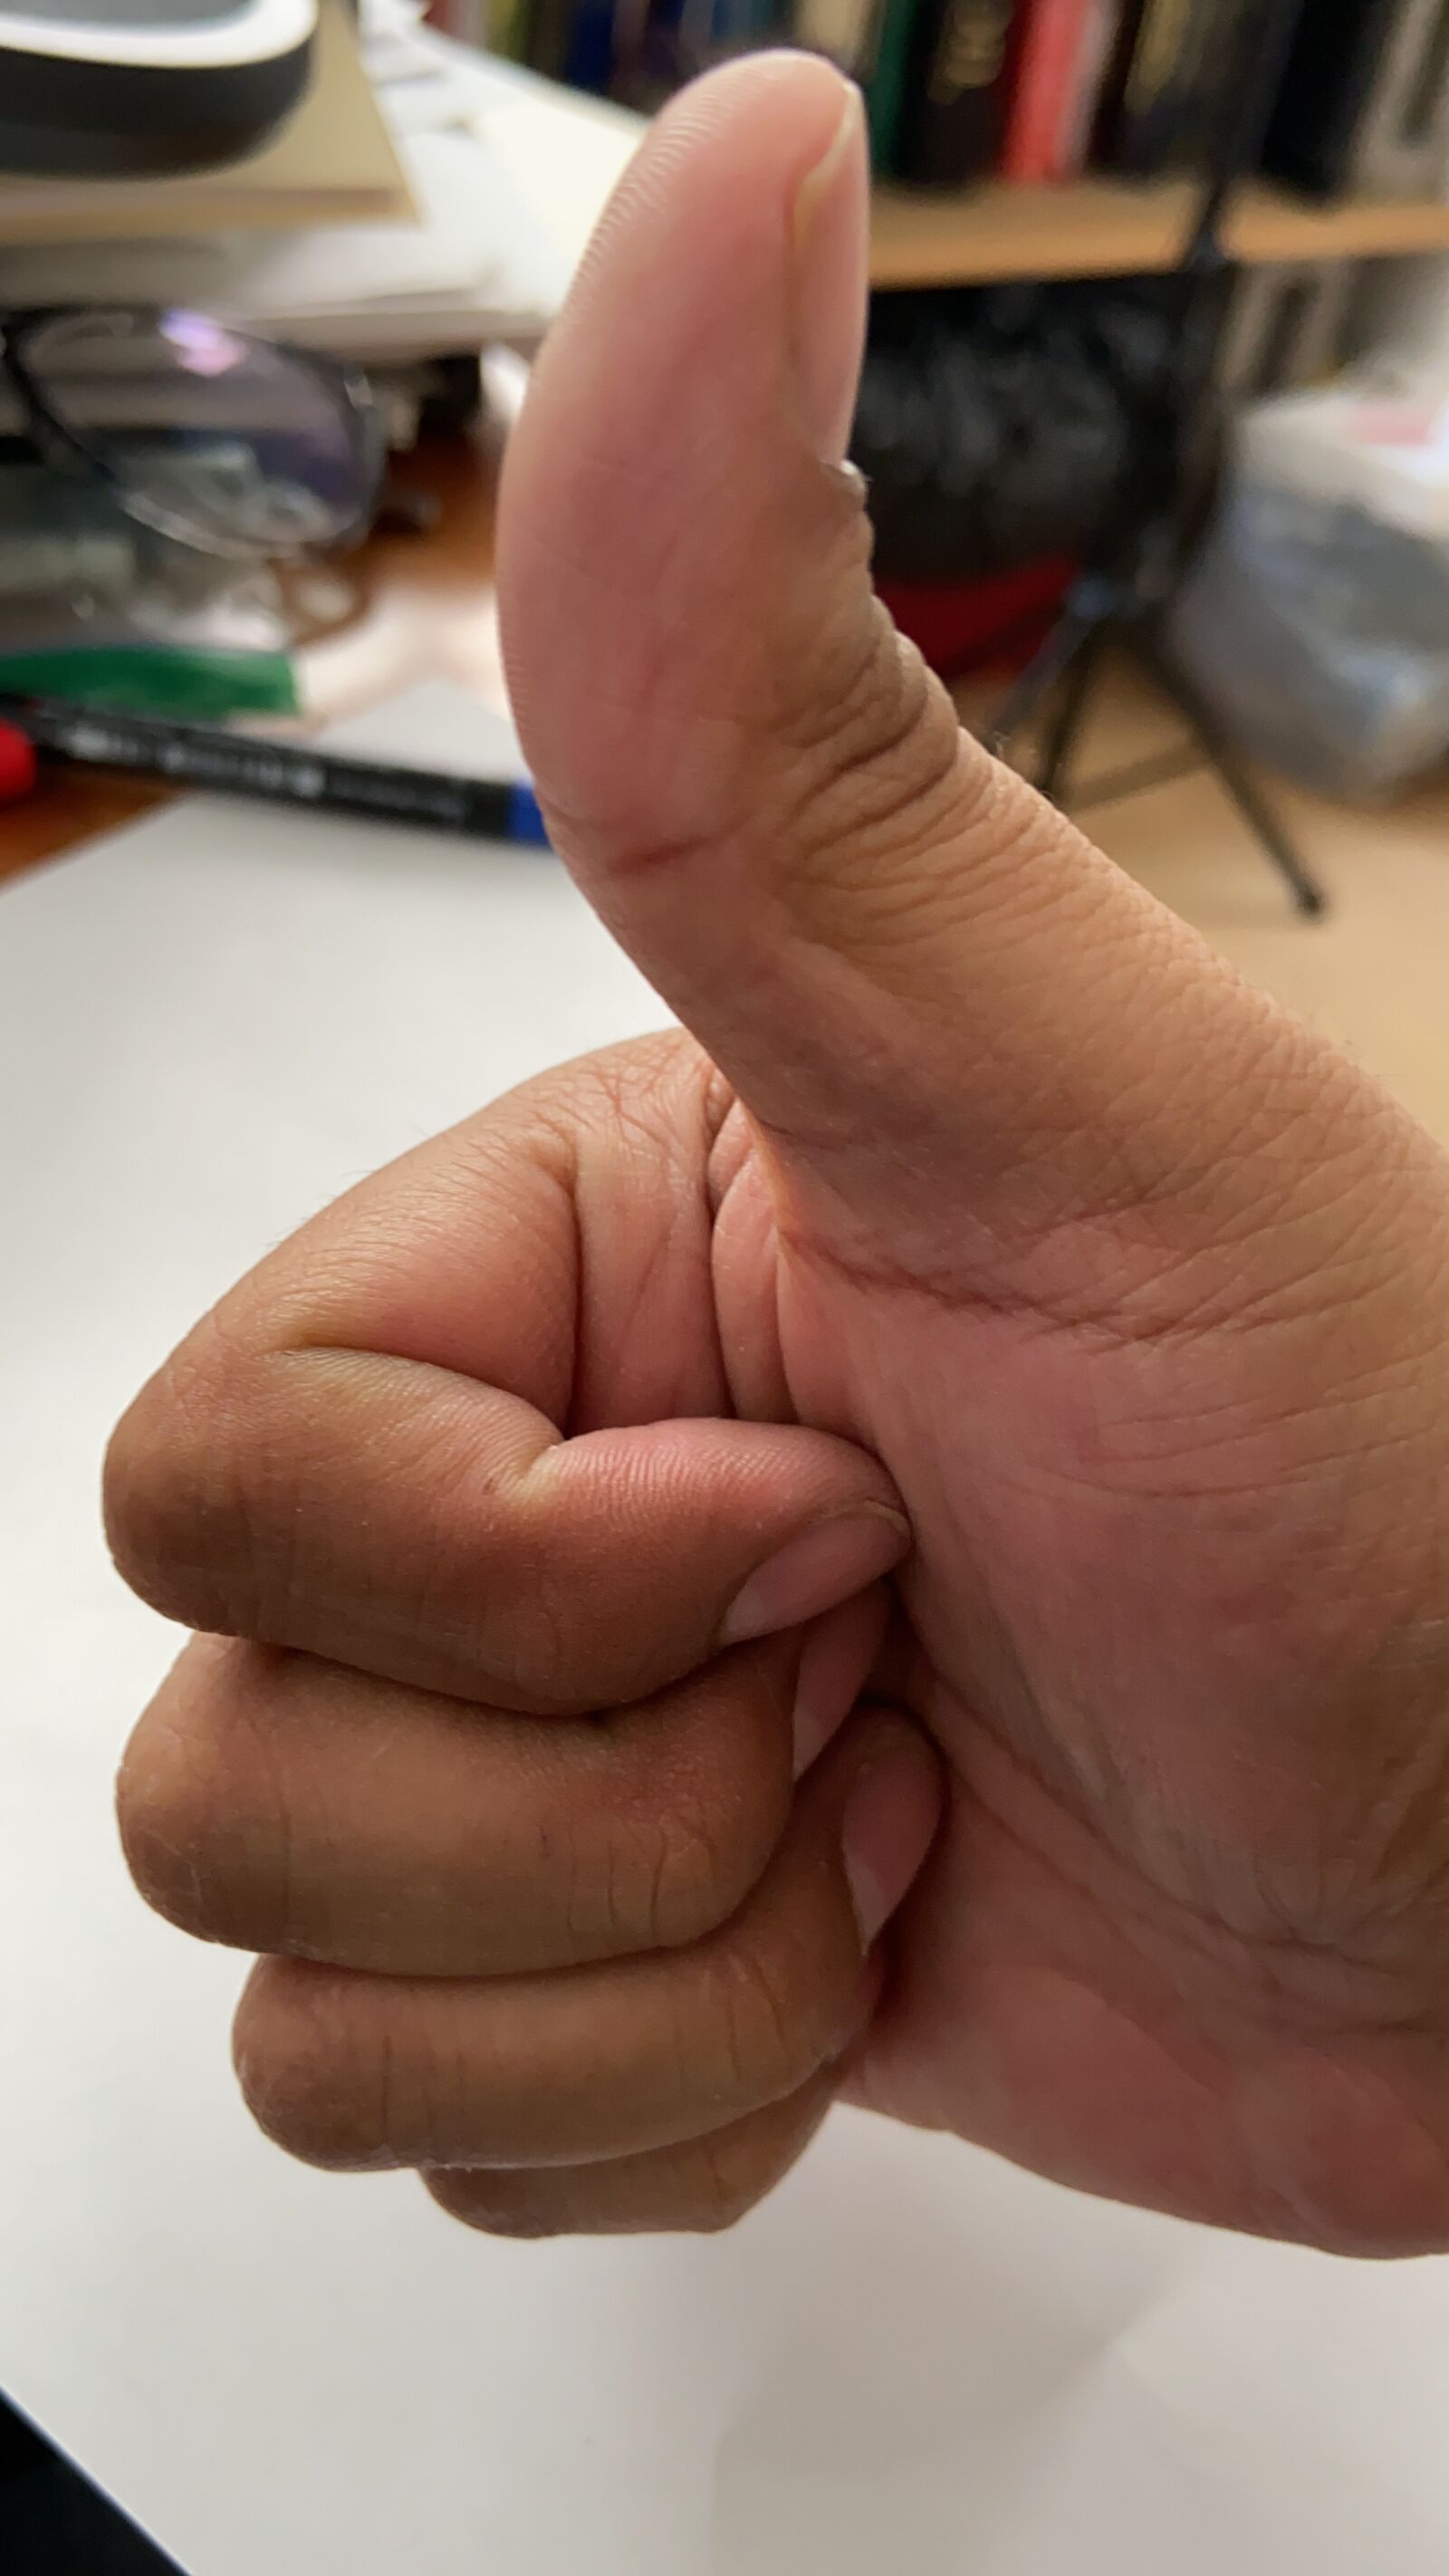 Apple iPhone 11 + iPhone 11 back camera 4.25mm f/1.8 sample photo. Like, hand, well photography